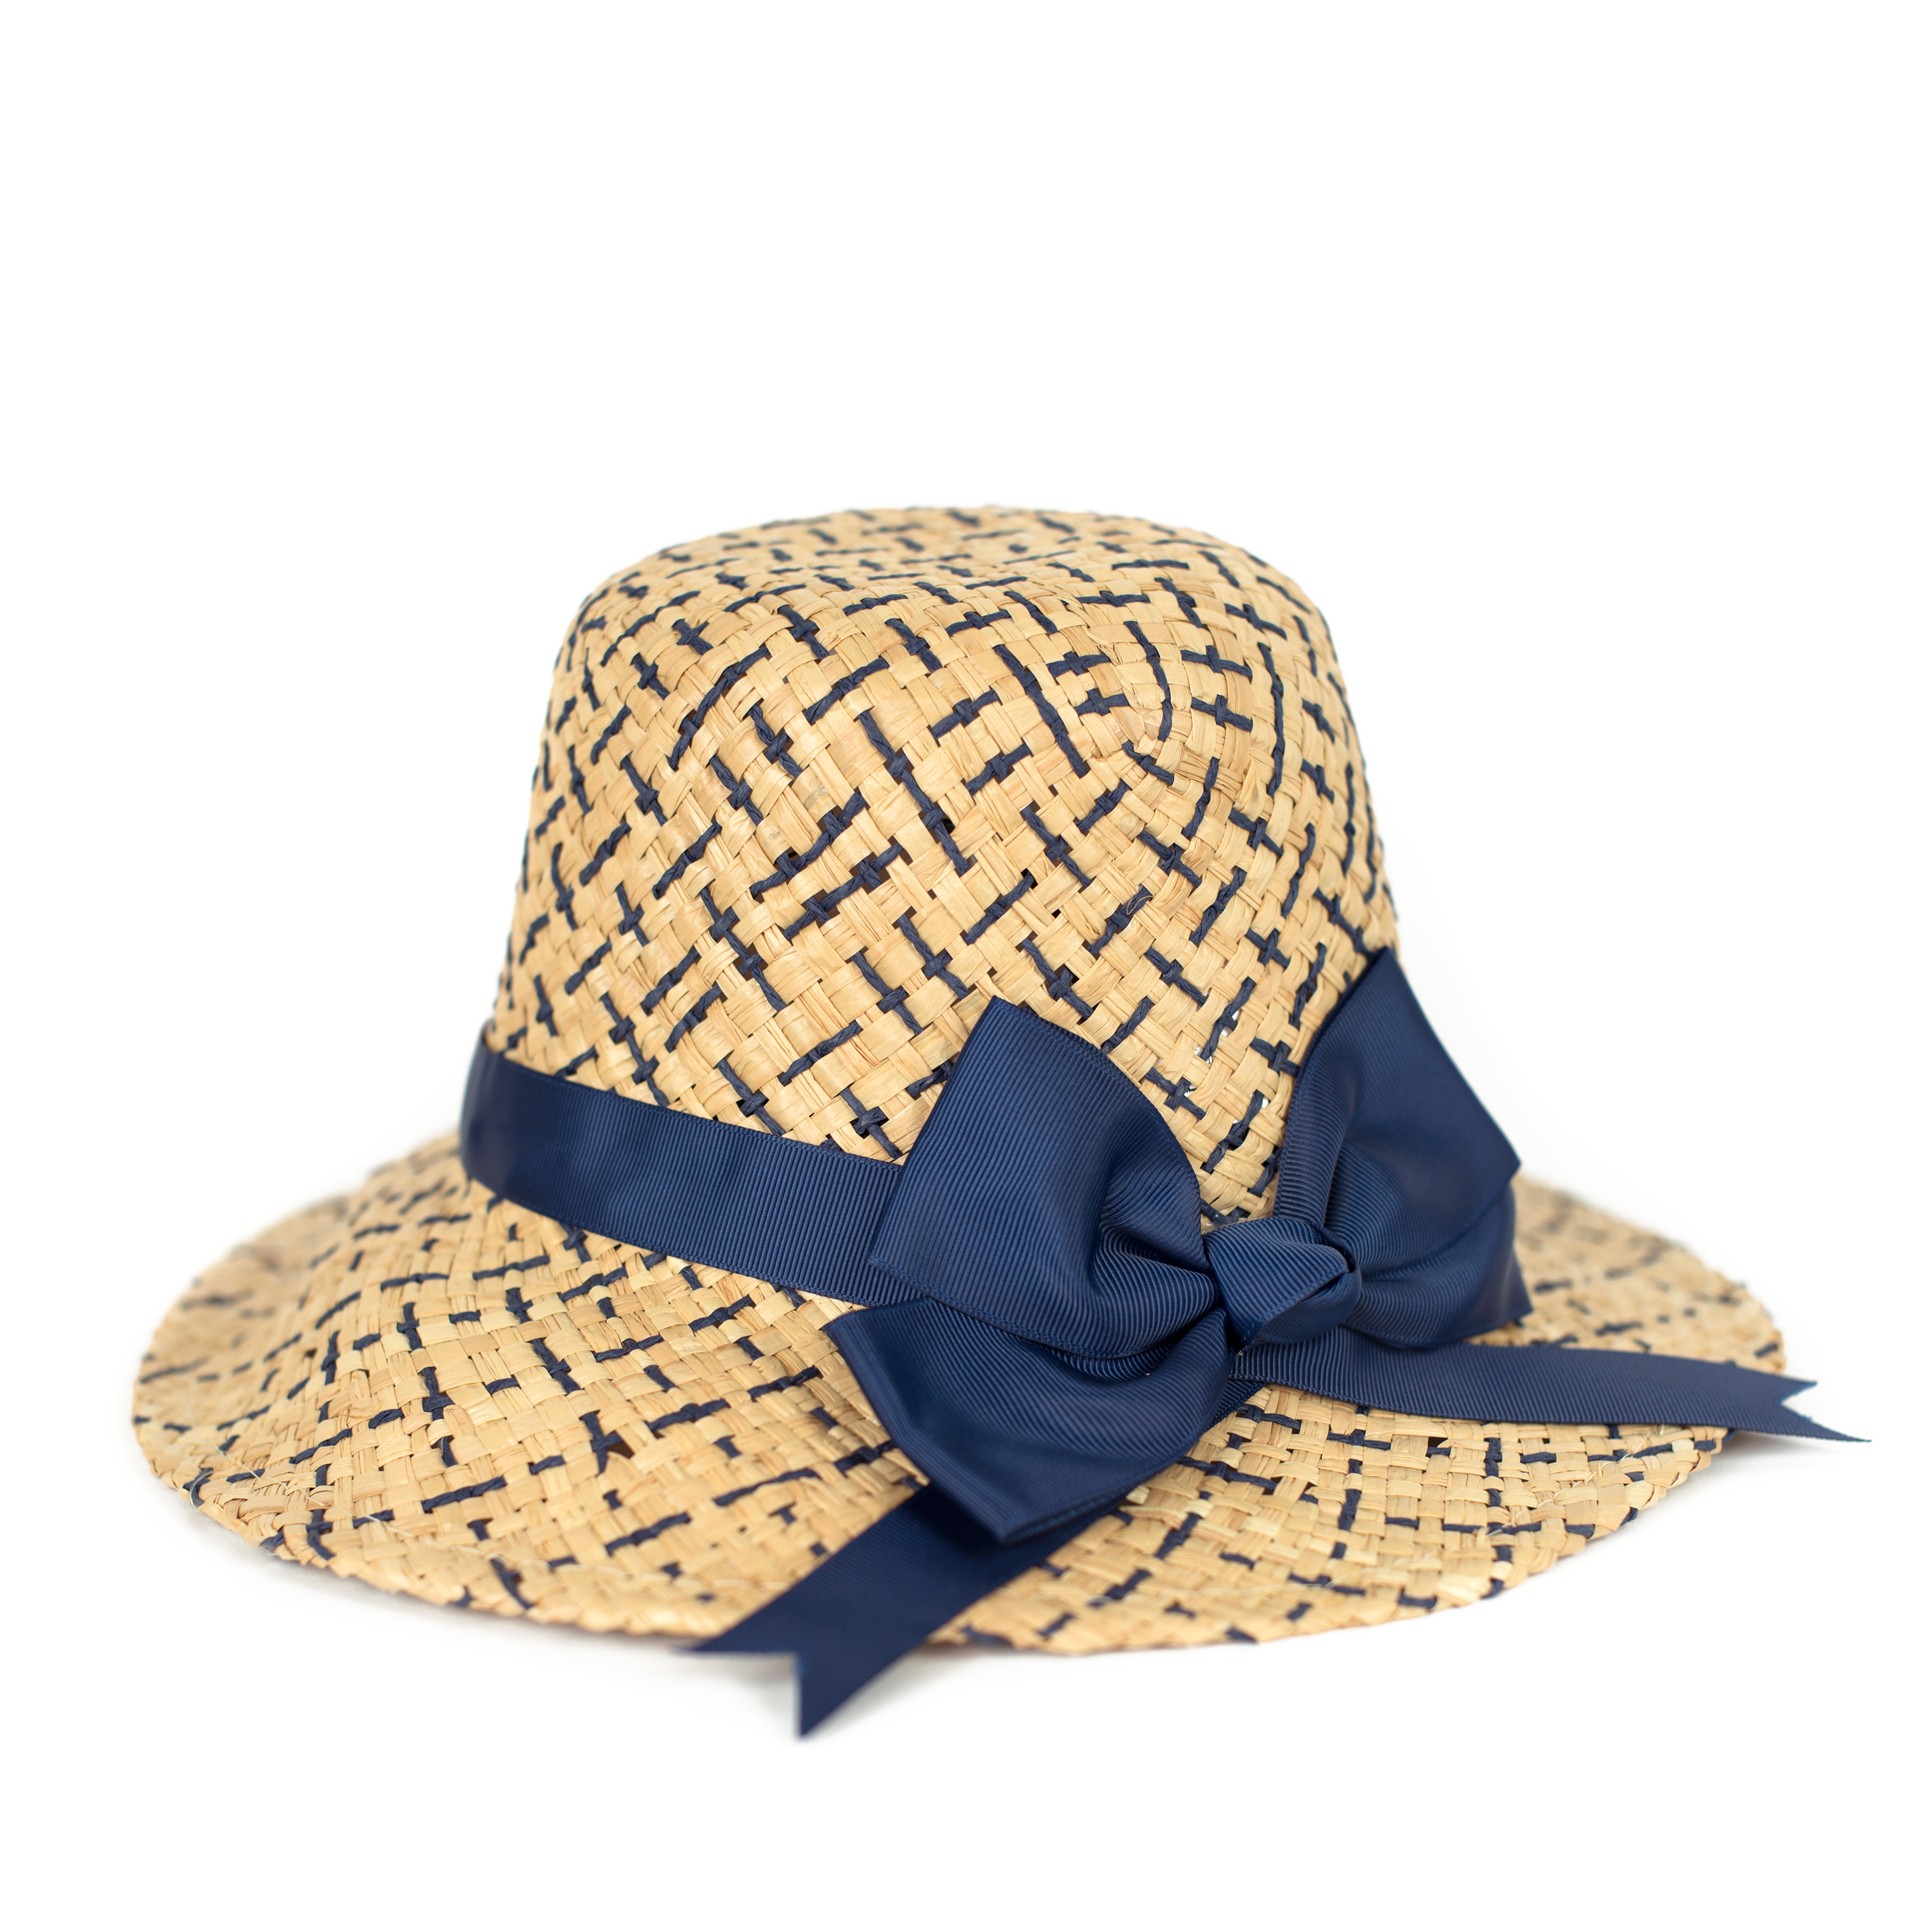 Art Of Polo Woman's Hat Cz21157-6 Navy Blue